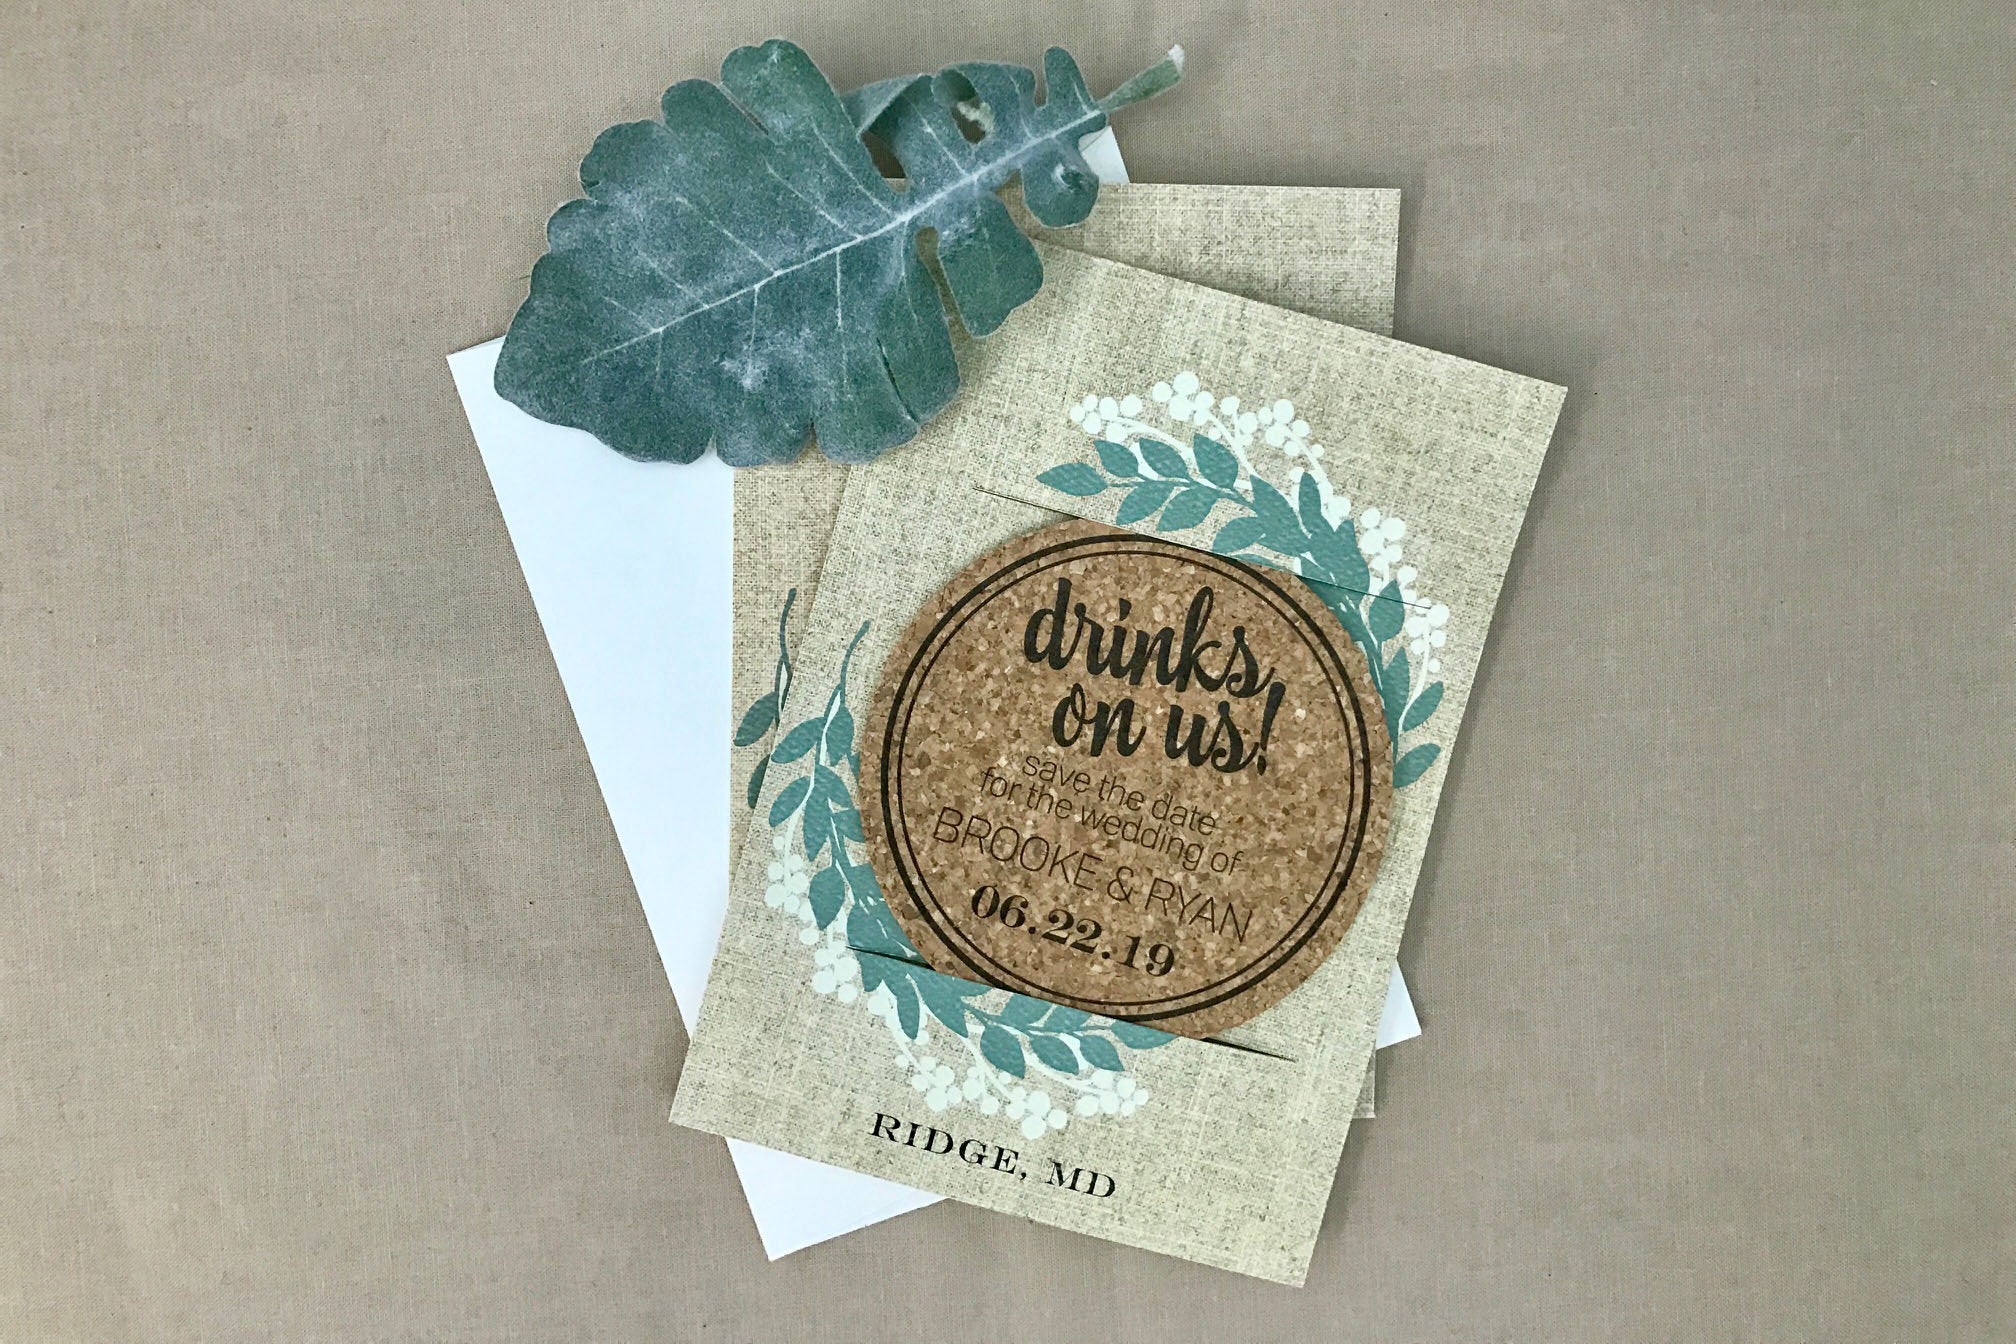 Eucalyptus Greenery Wreath and Linen Drinks on Us Cork Coaster Save the Date with A7 Envelopes